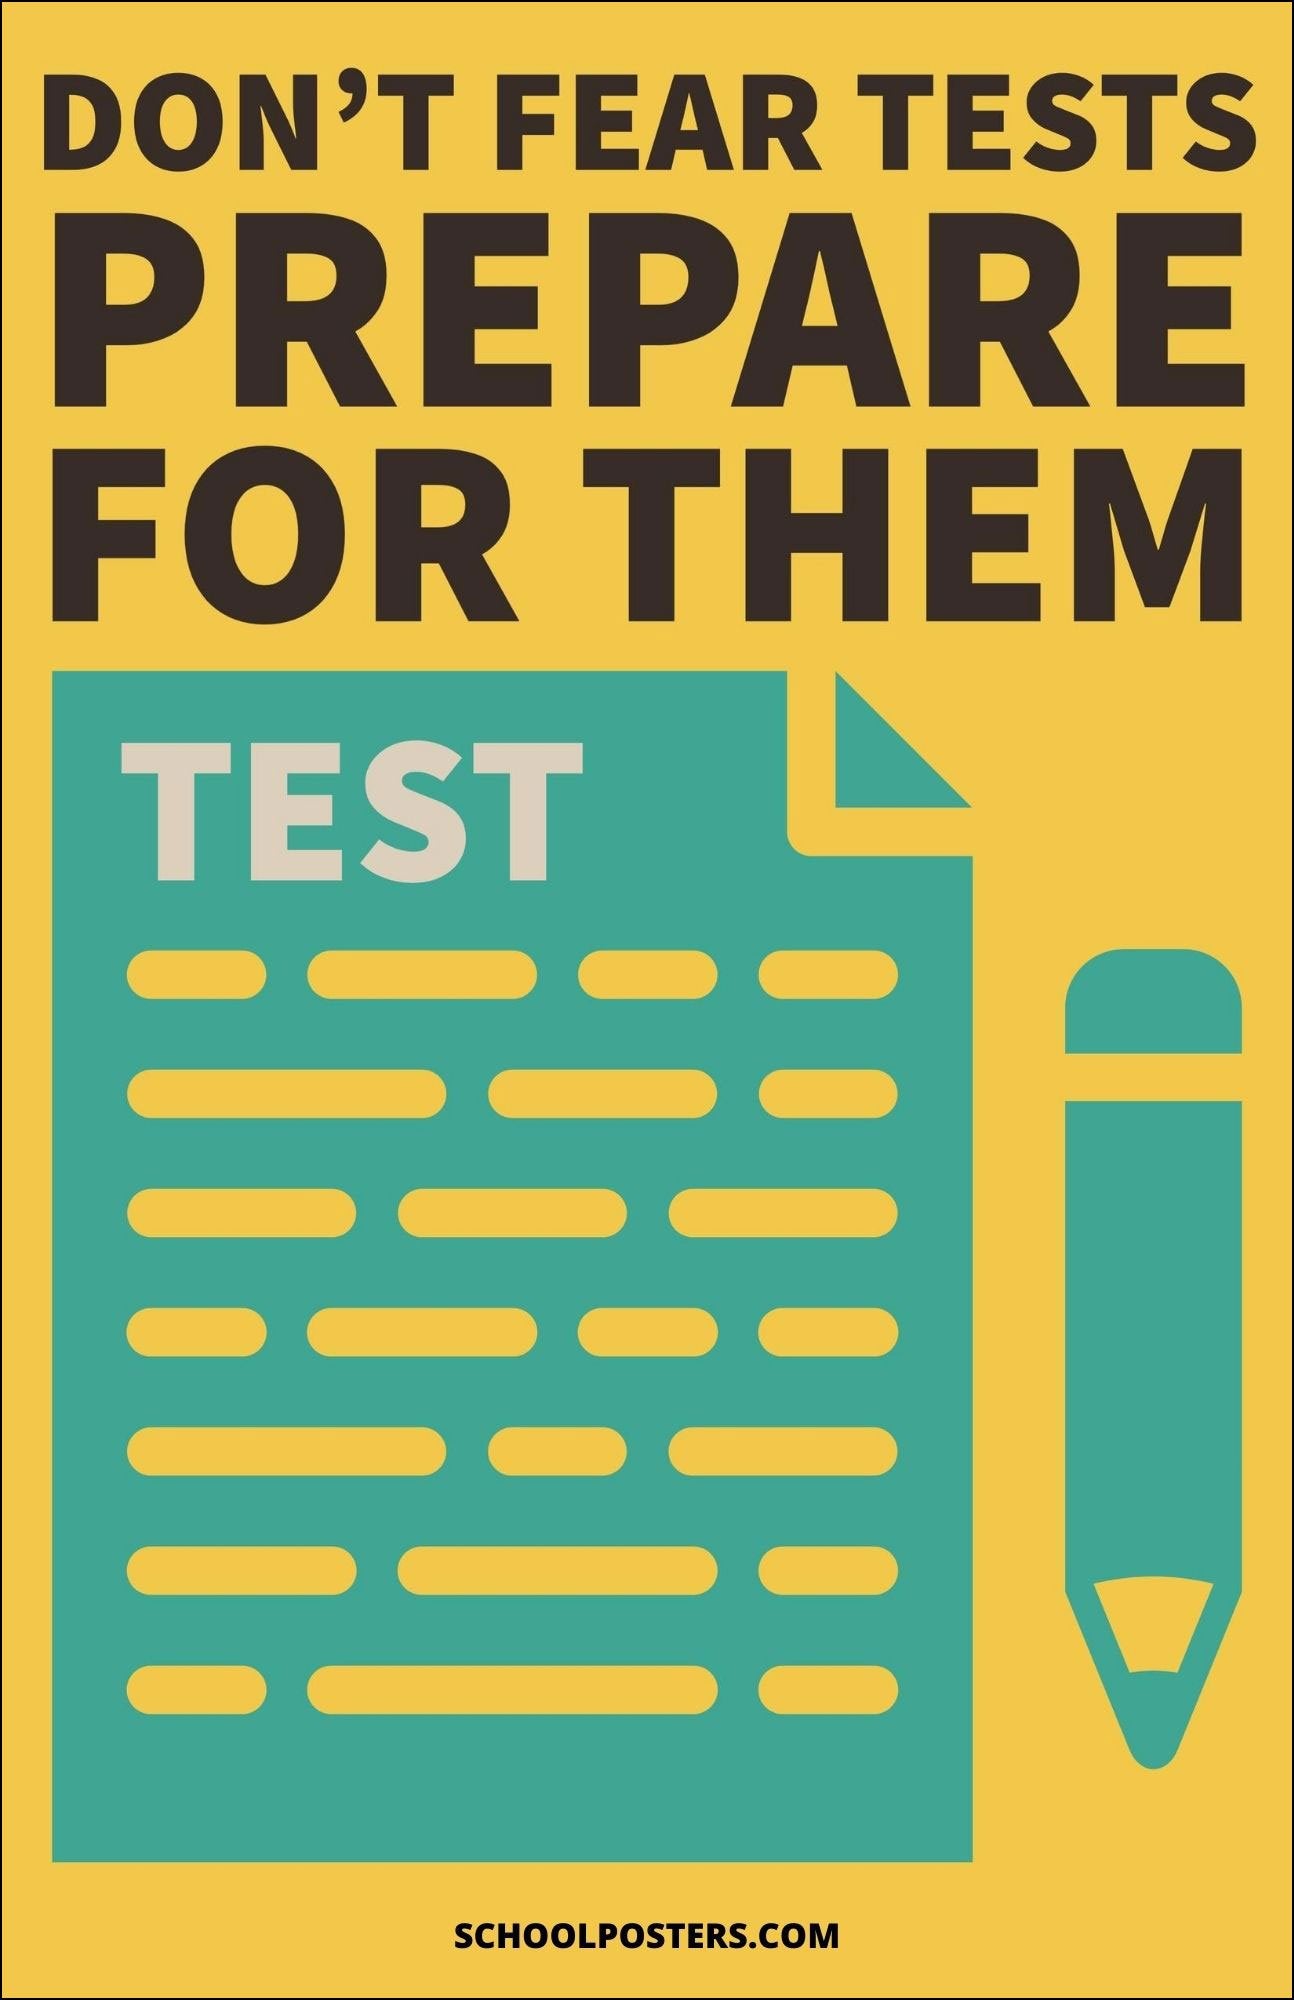 Do Not Fear Tests Prepare For Them Poster